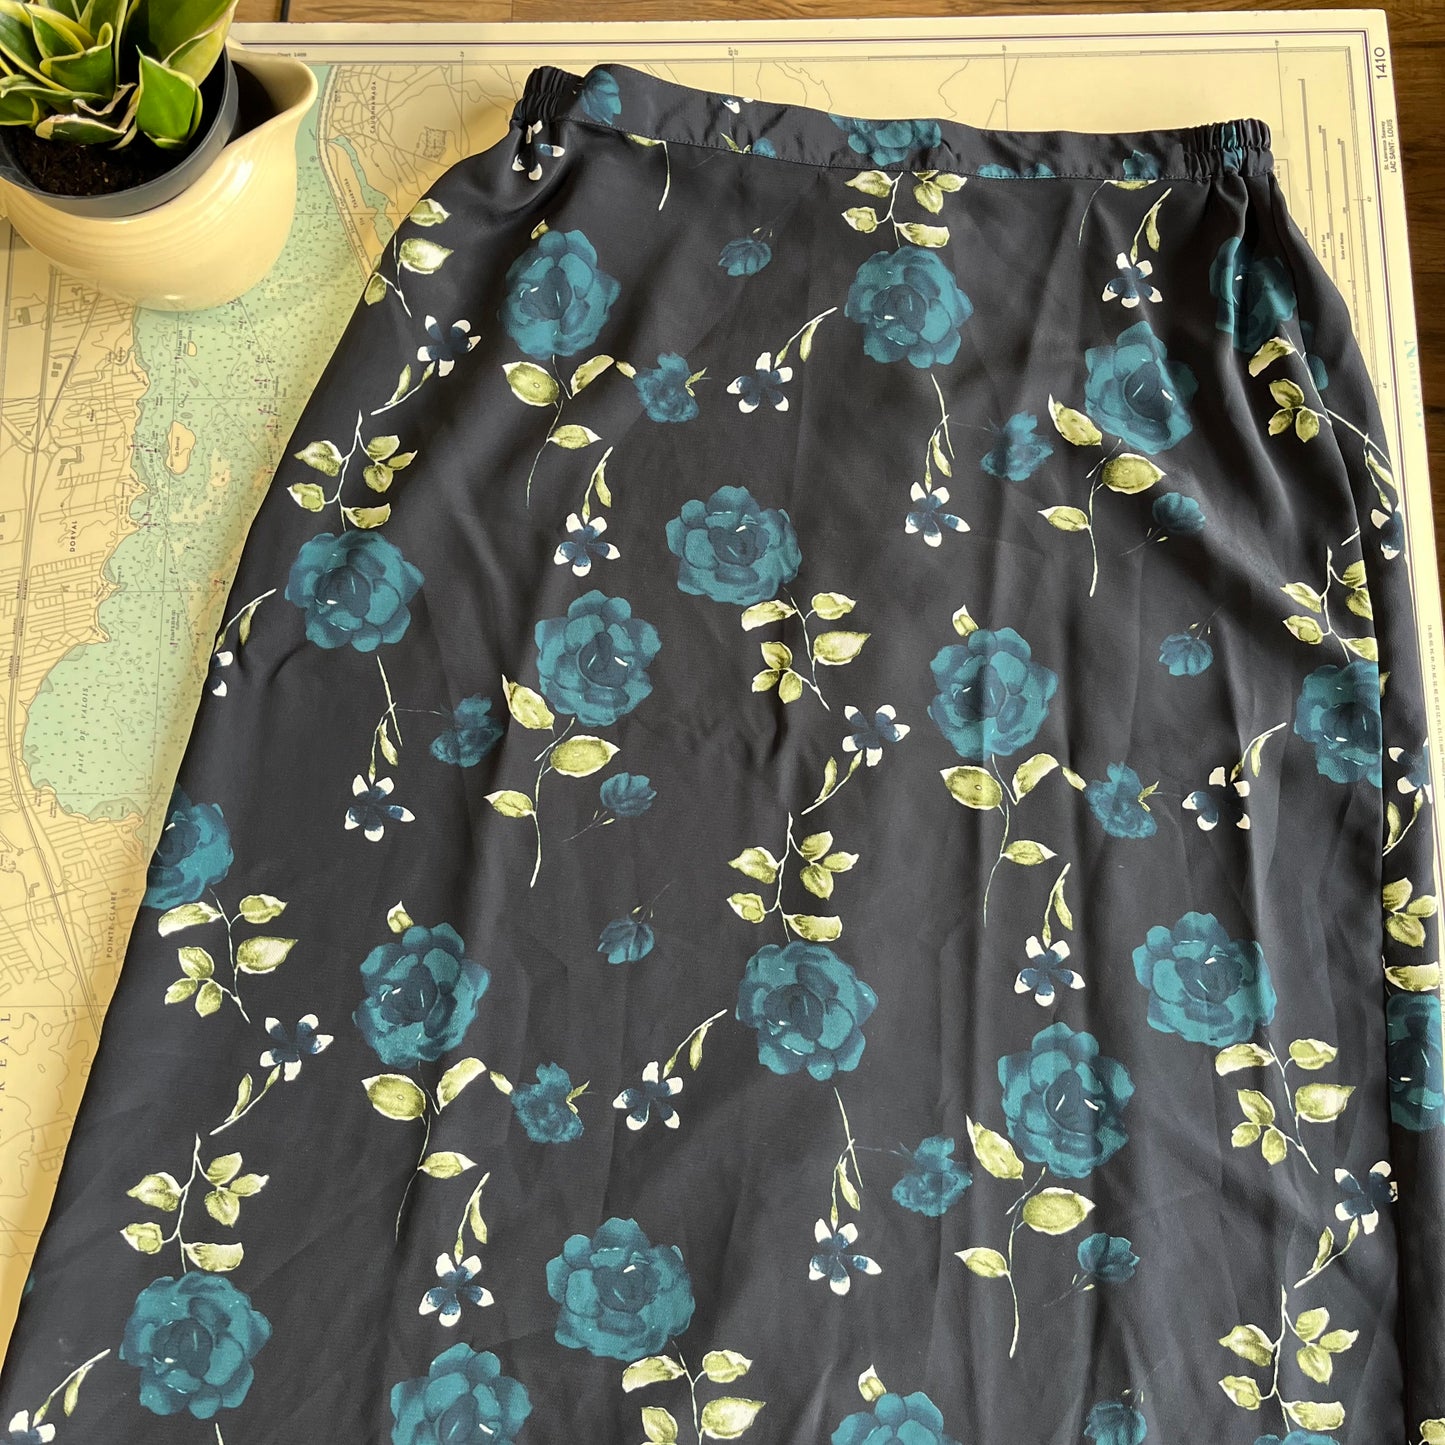 Vintage 90s Dark Floral Navy and Teal Button Front Skirt